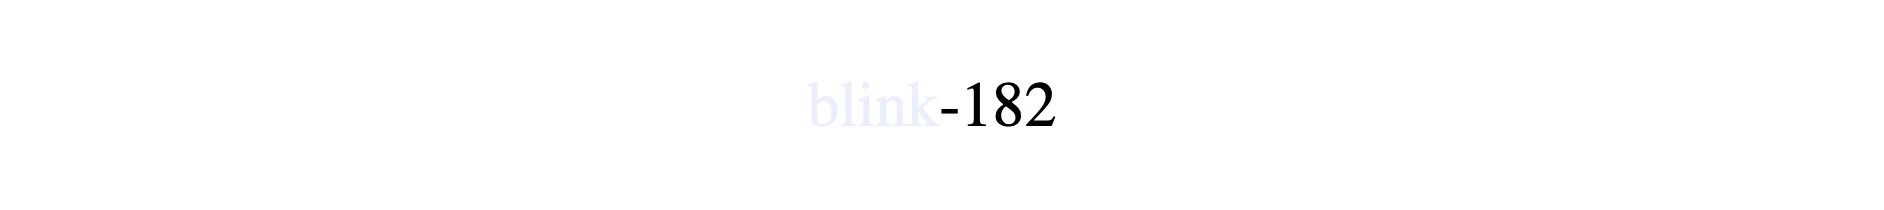 Make It Blink HTML Tutorial – How to Use the Blink Tag, with Code Examples